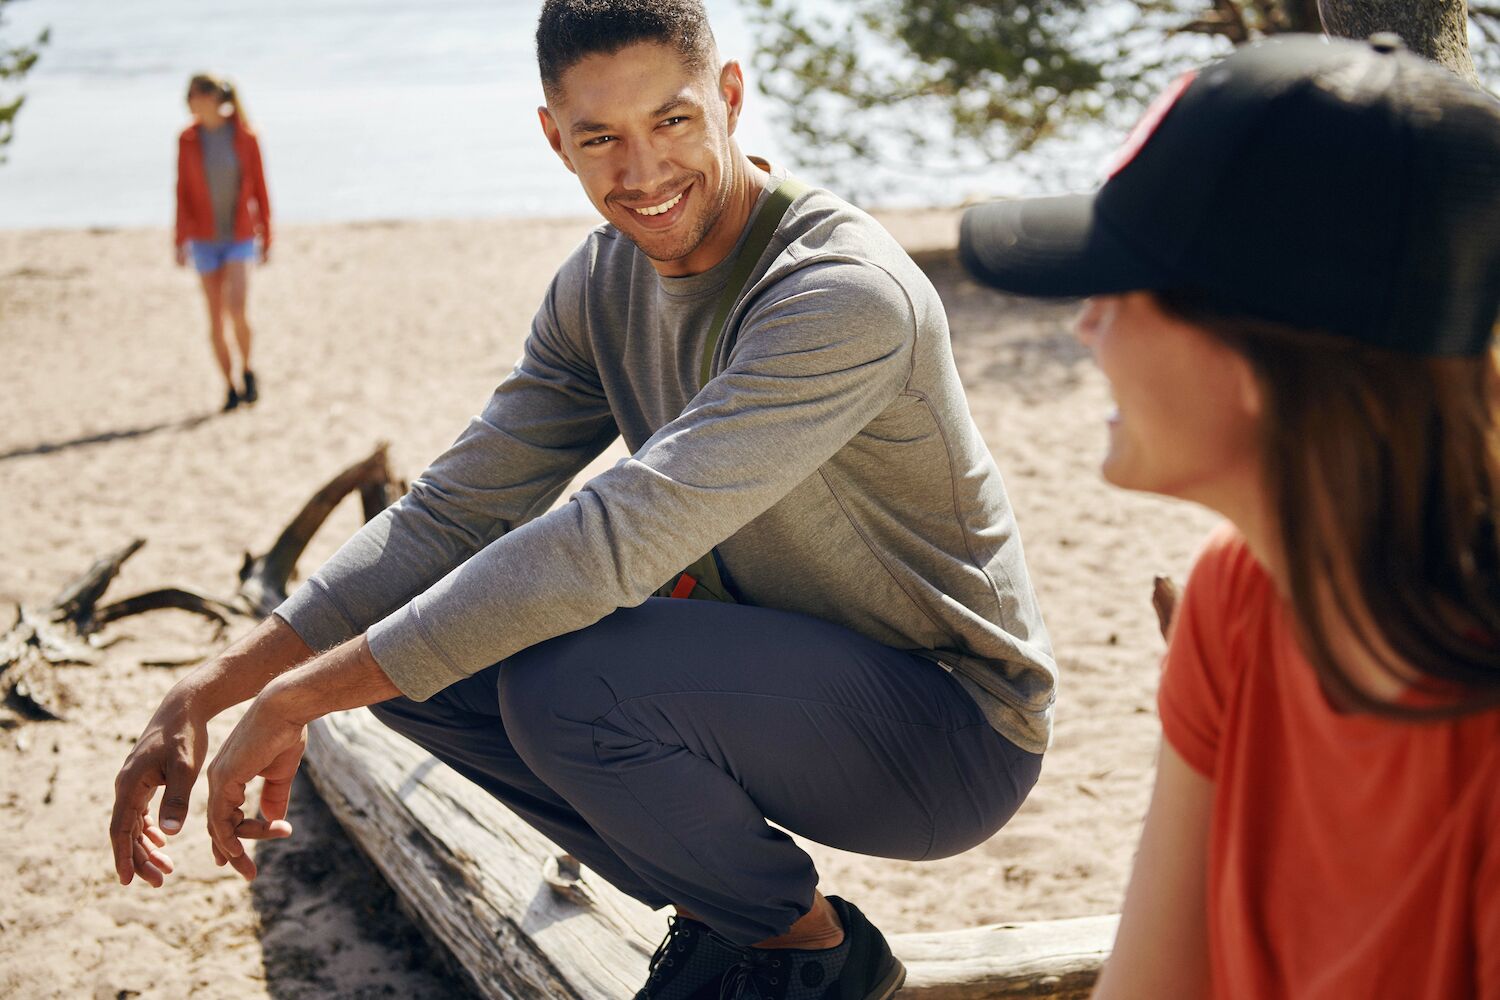 one girl wearing black fjallraven cap with red fox logo and red t-shirt is sitting with a guy on beach.  and one more girl is coming towards them from backside.